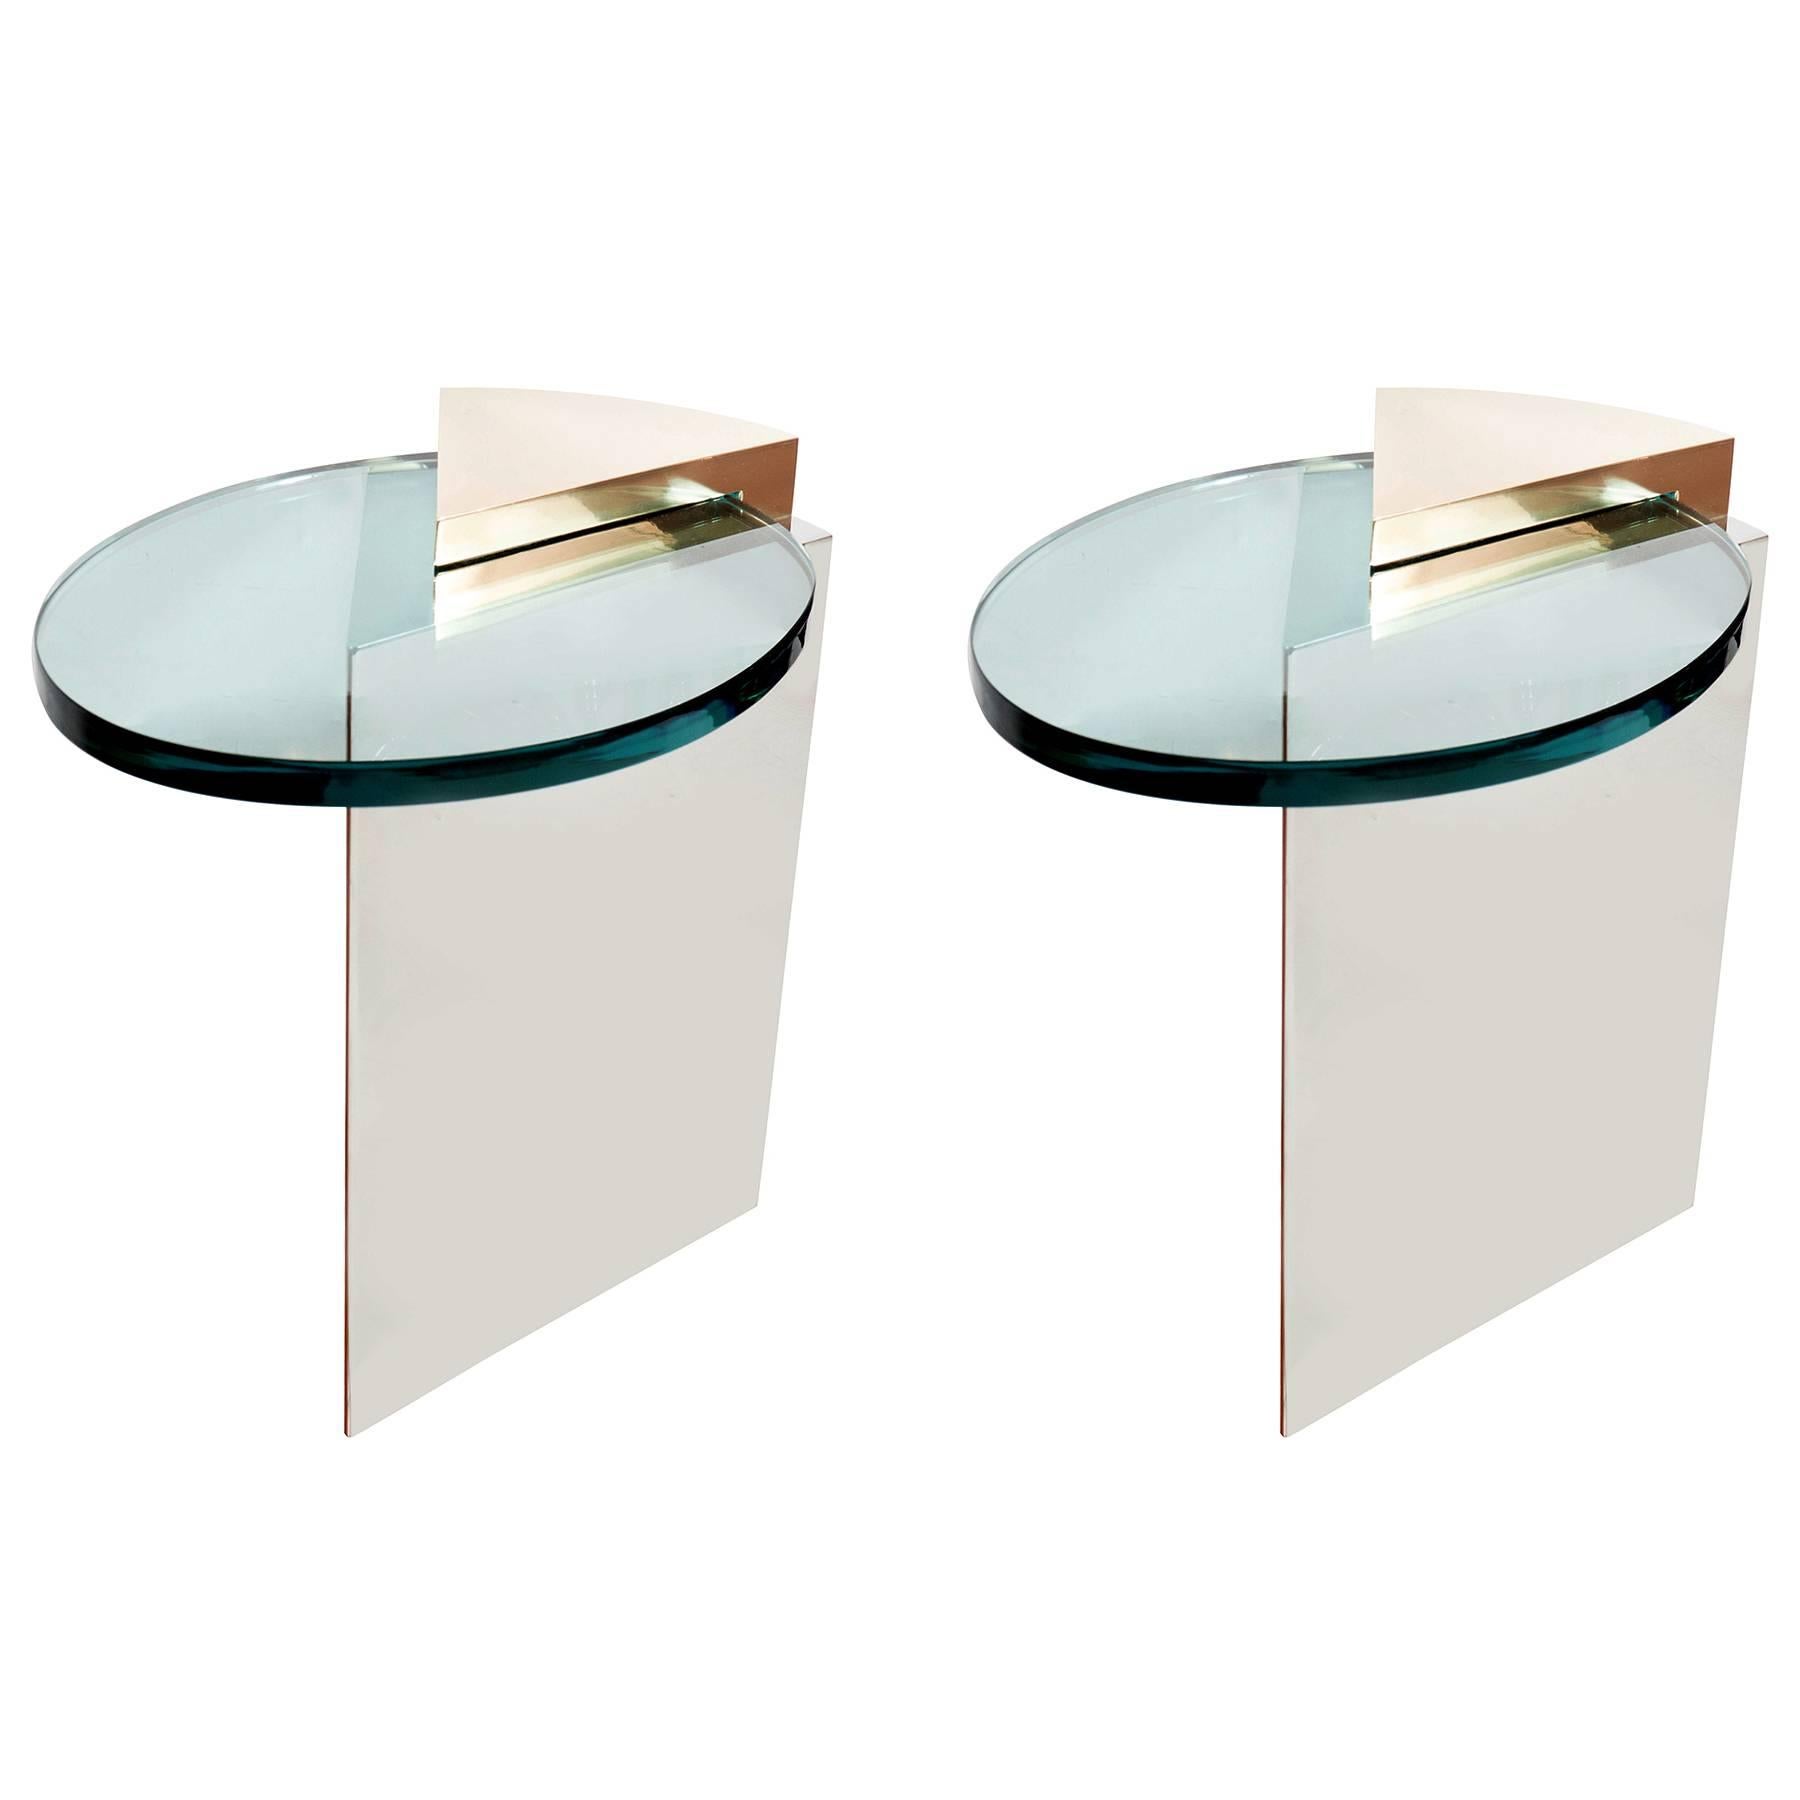 Pair of Angular Chrome and Brass Cantilevered Tables